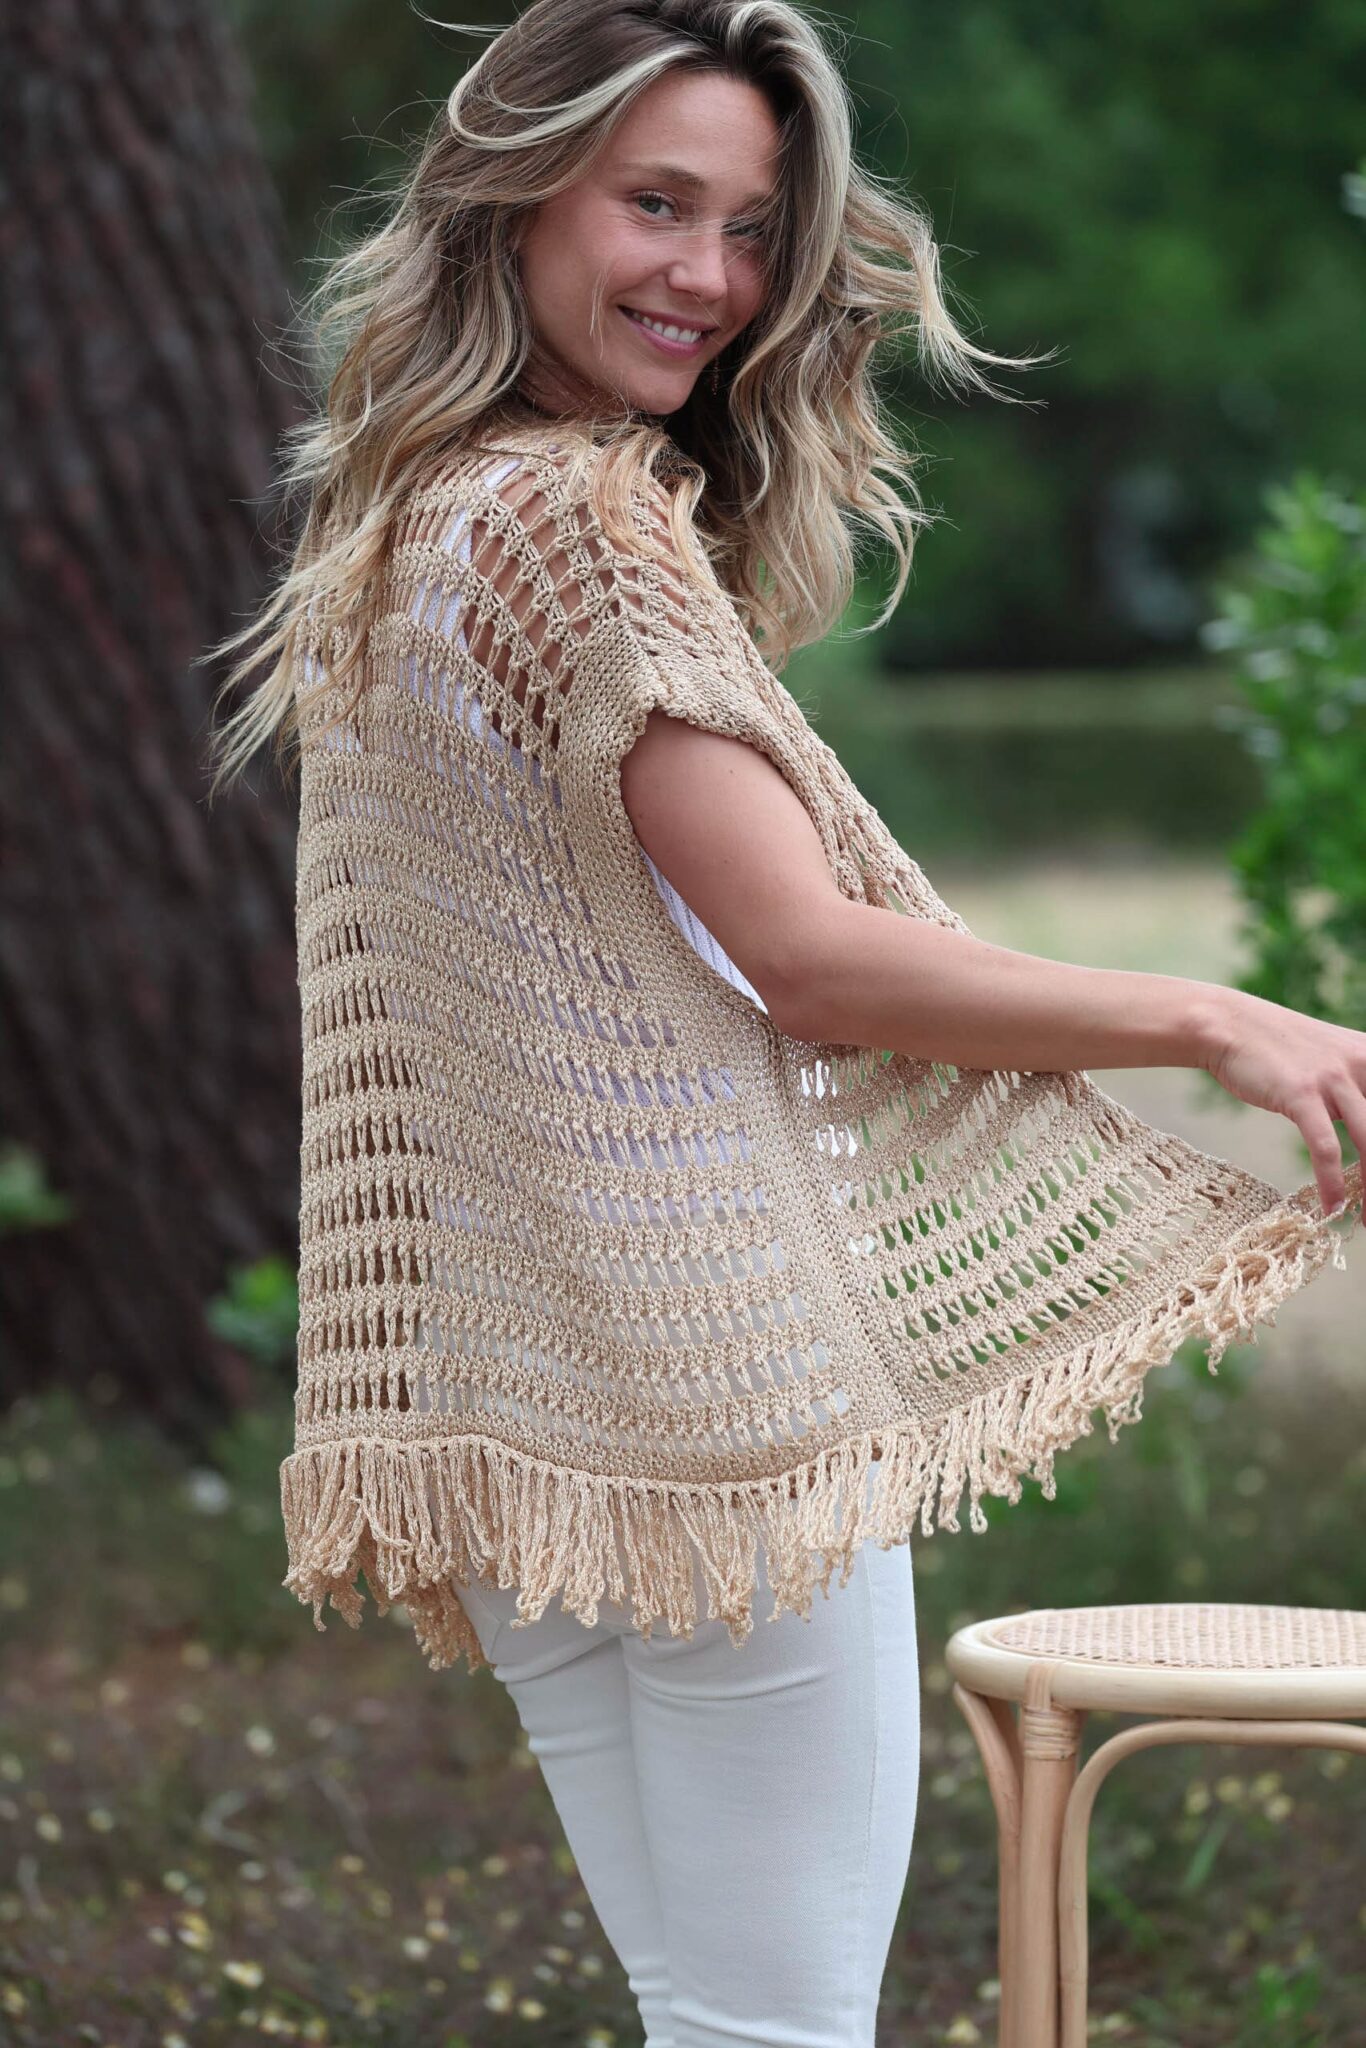 Golden vest with back fringes with white trousers